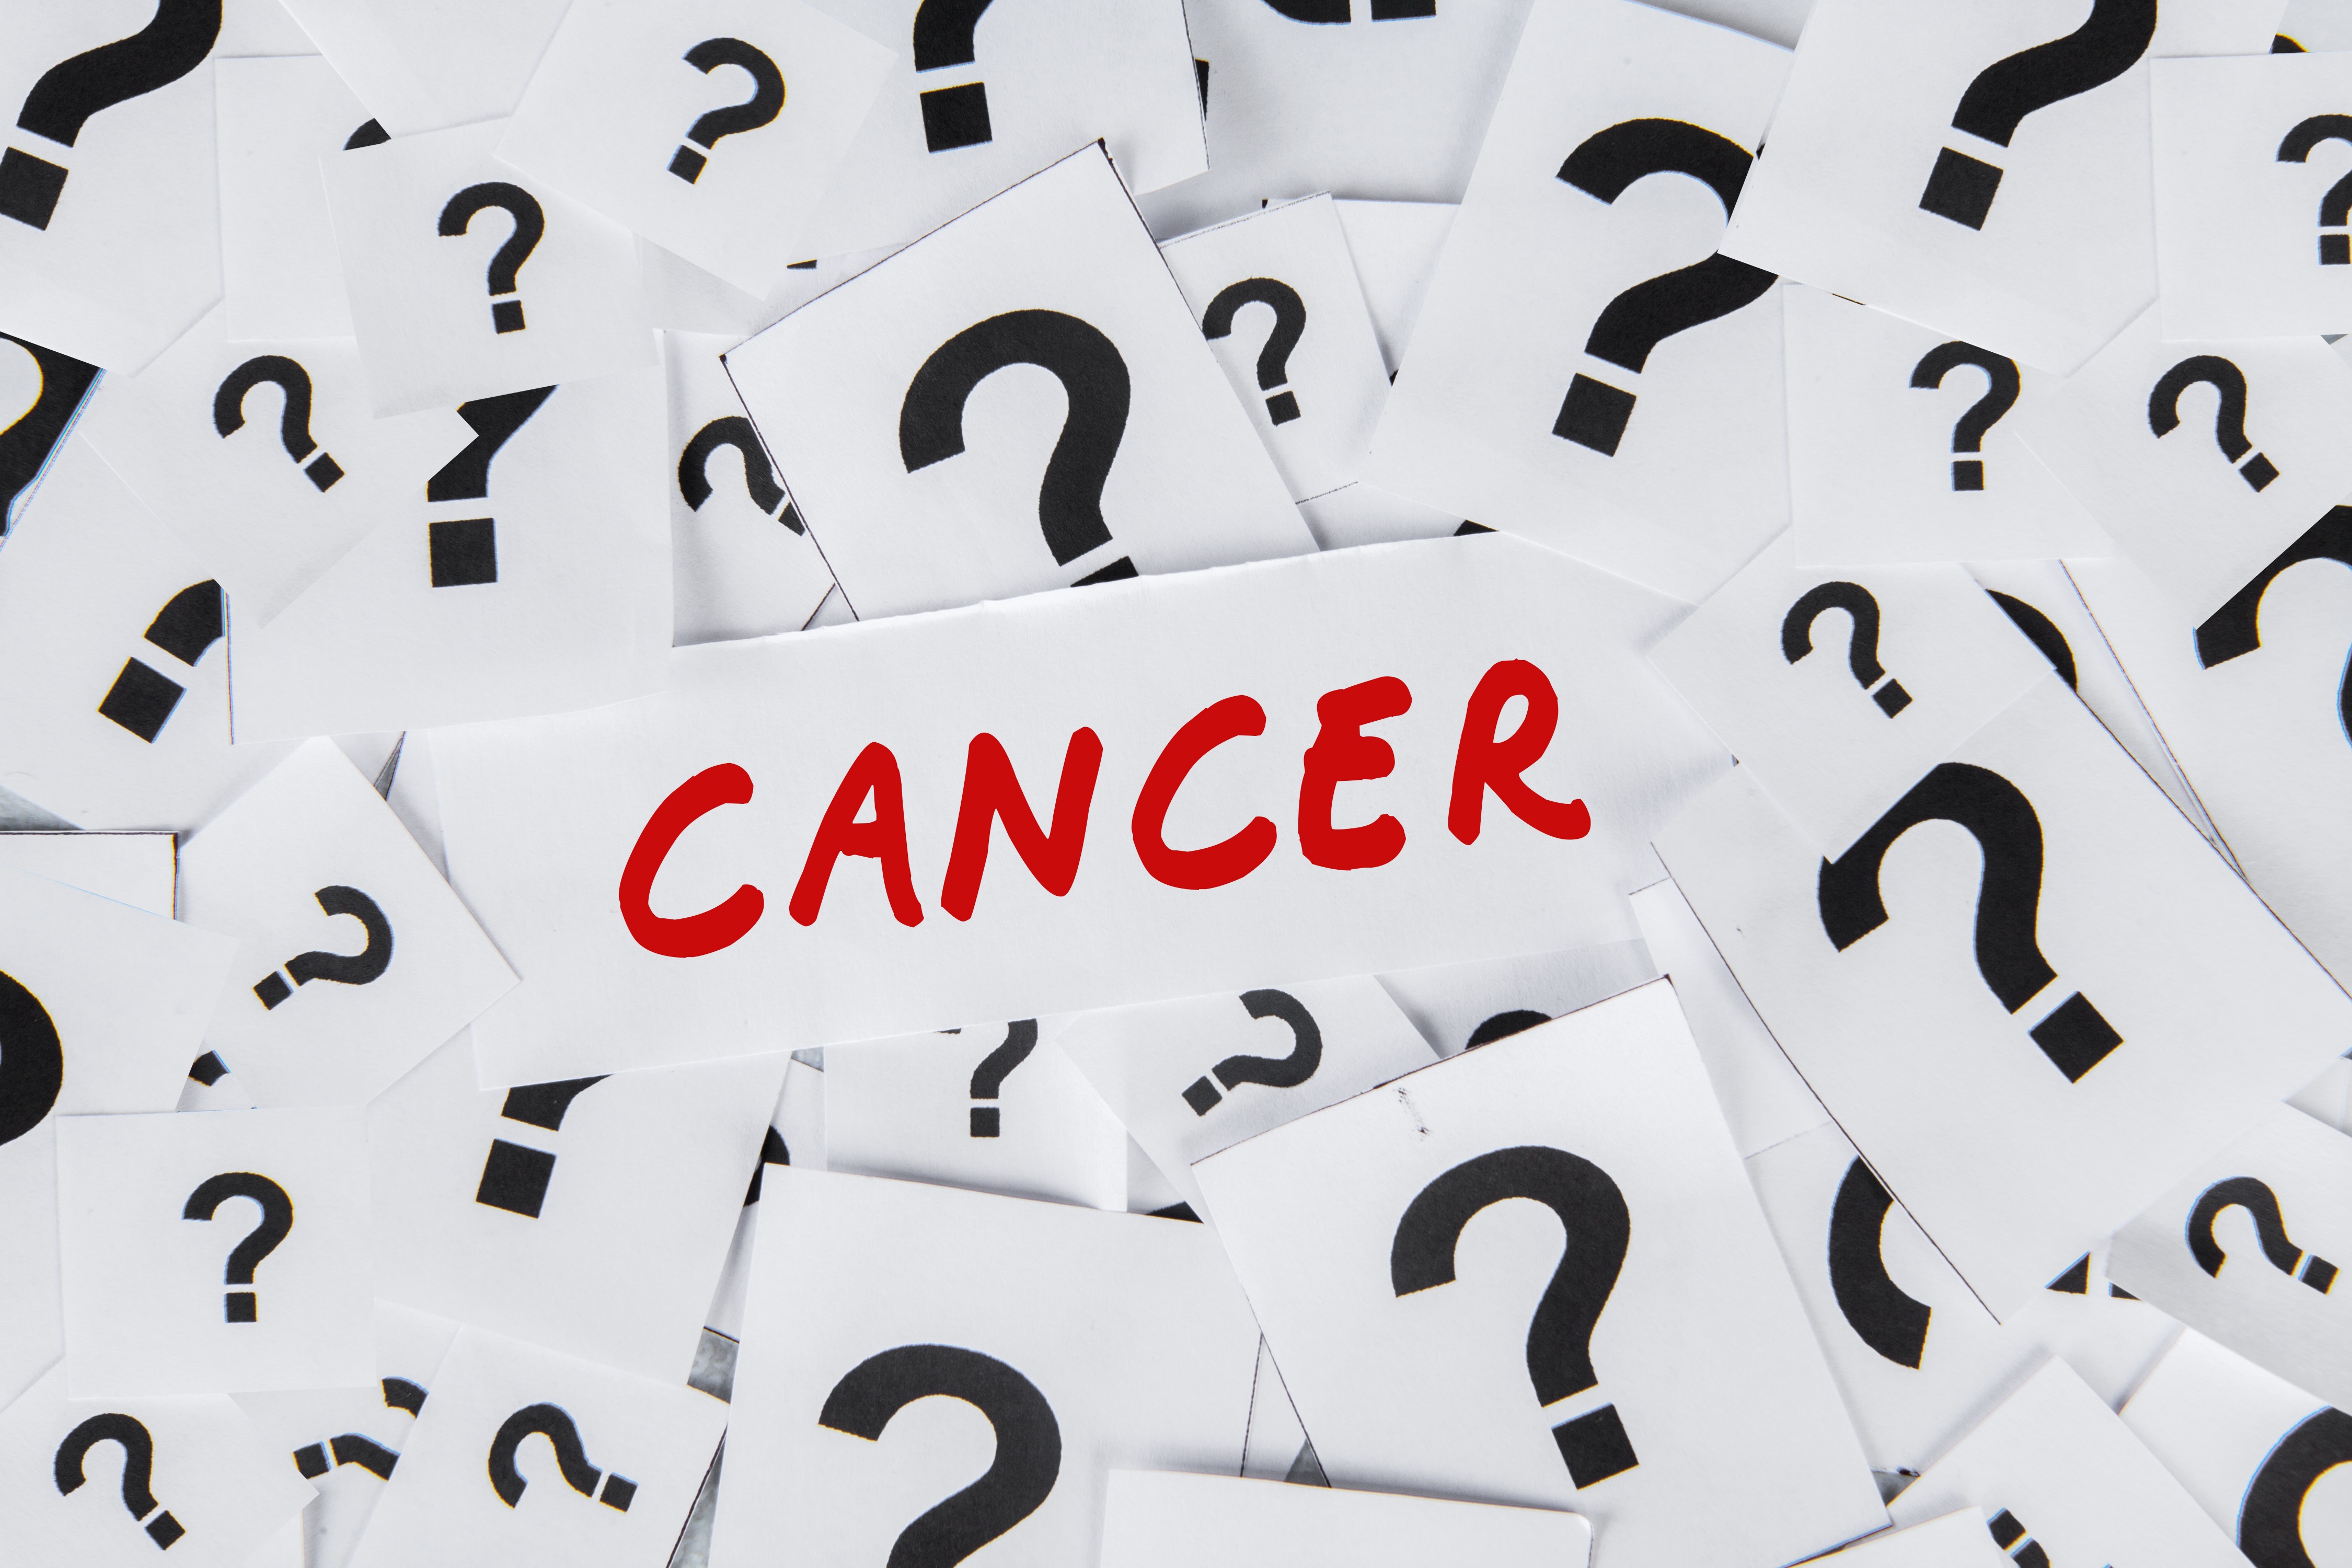 cancer research topic questions